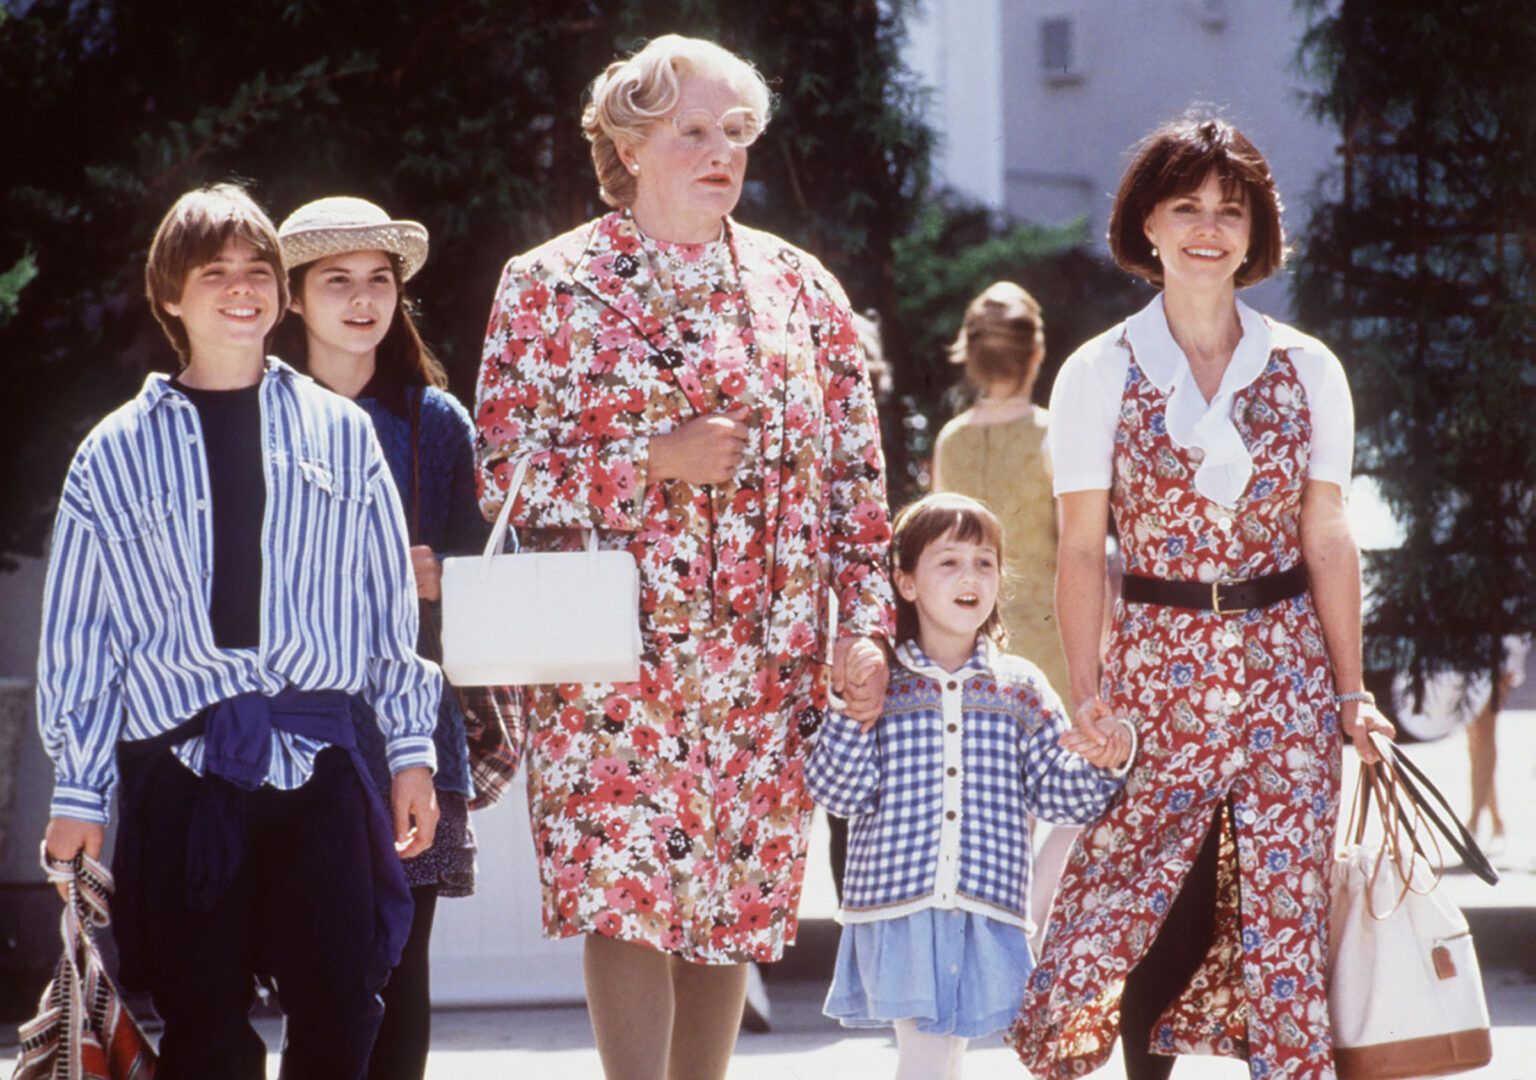 Did the cast of 'Mrs. Doubtfire' reveal there's an X-rated cut of the beloved 90s classic? See why Twitter's abuzz about this beloved movie again.